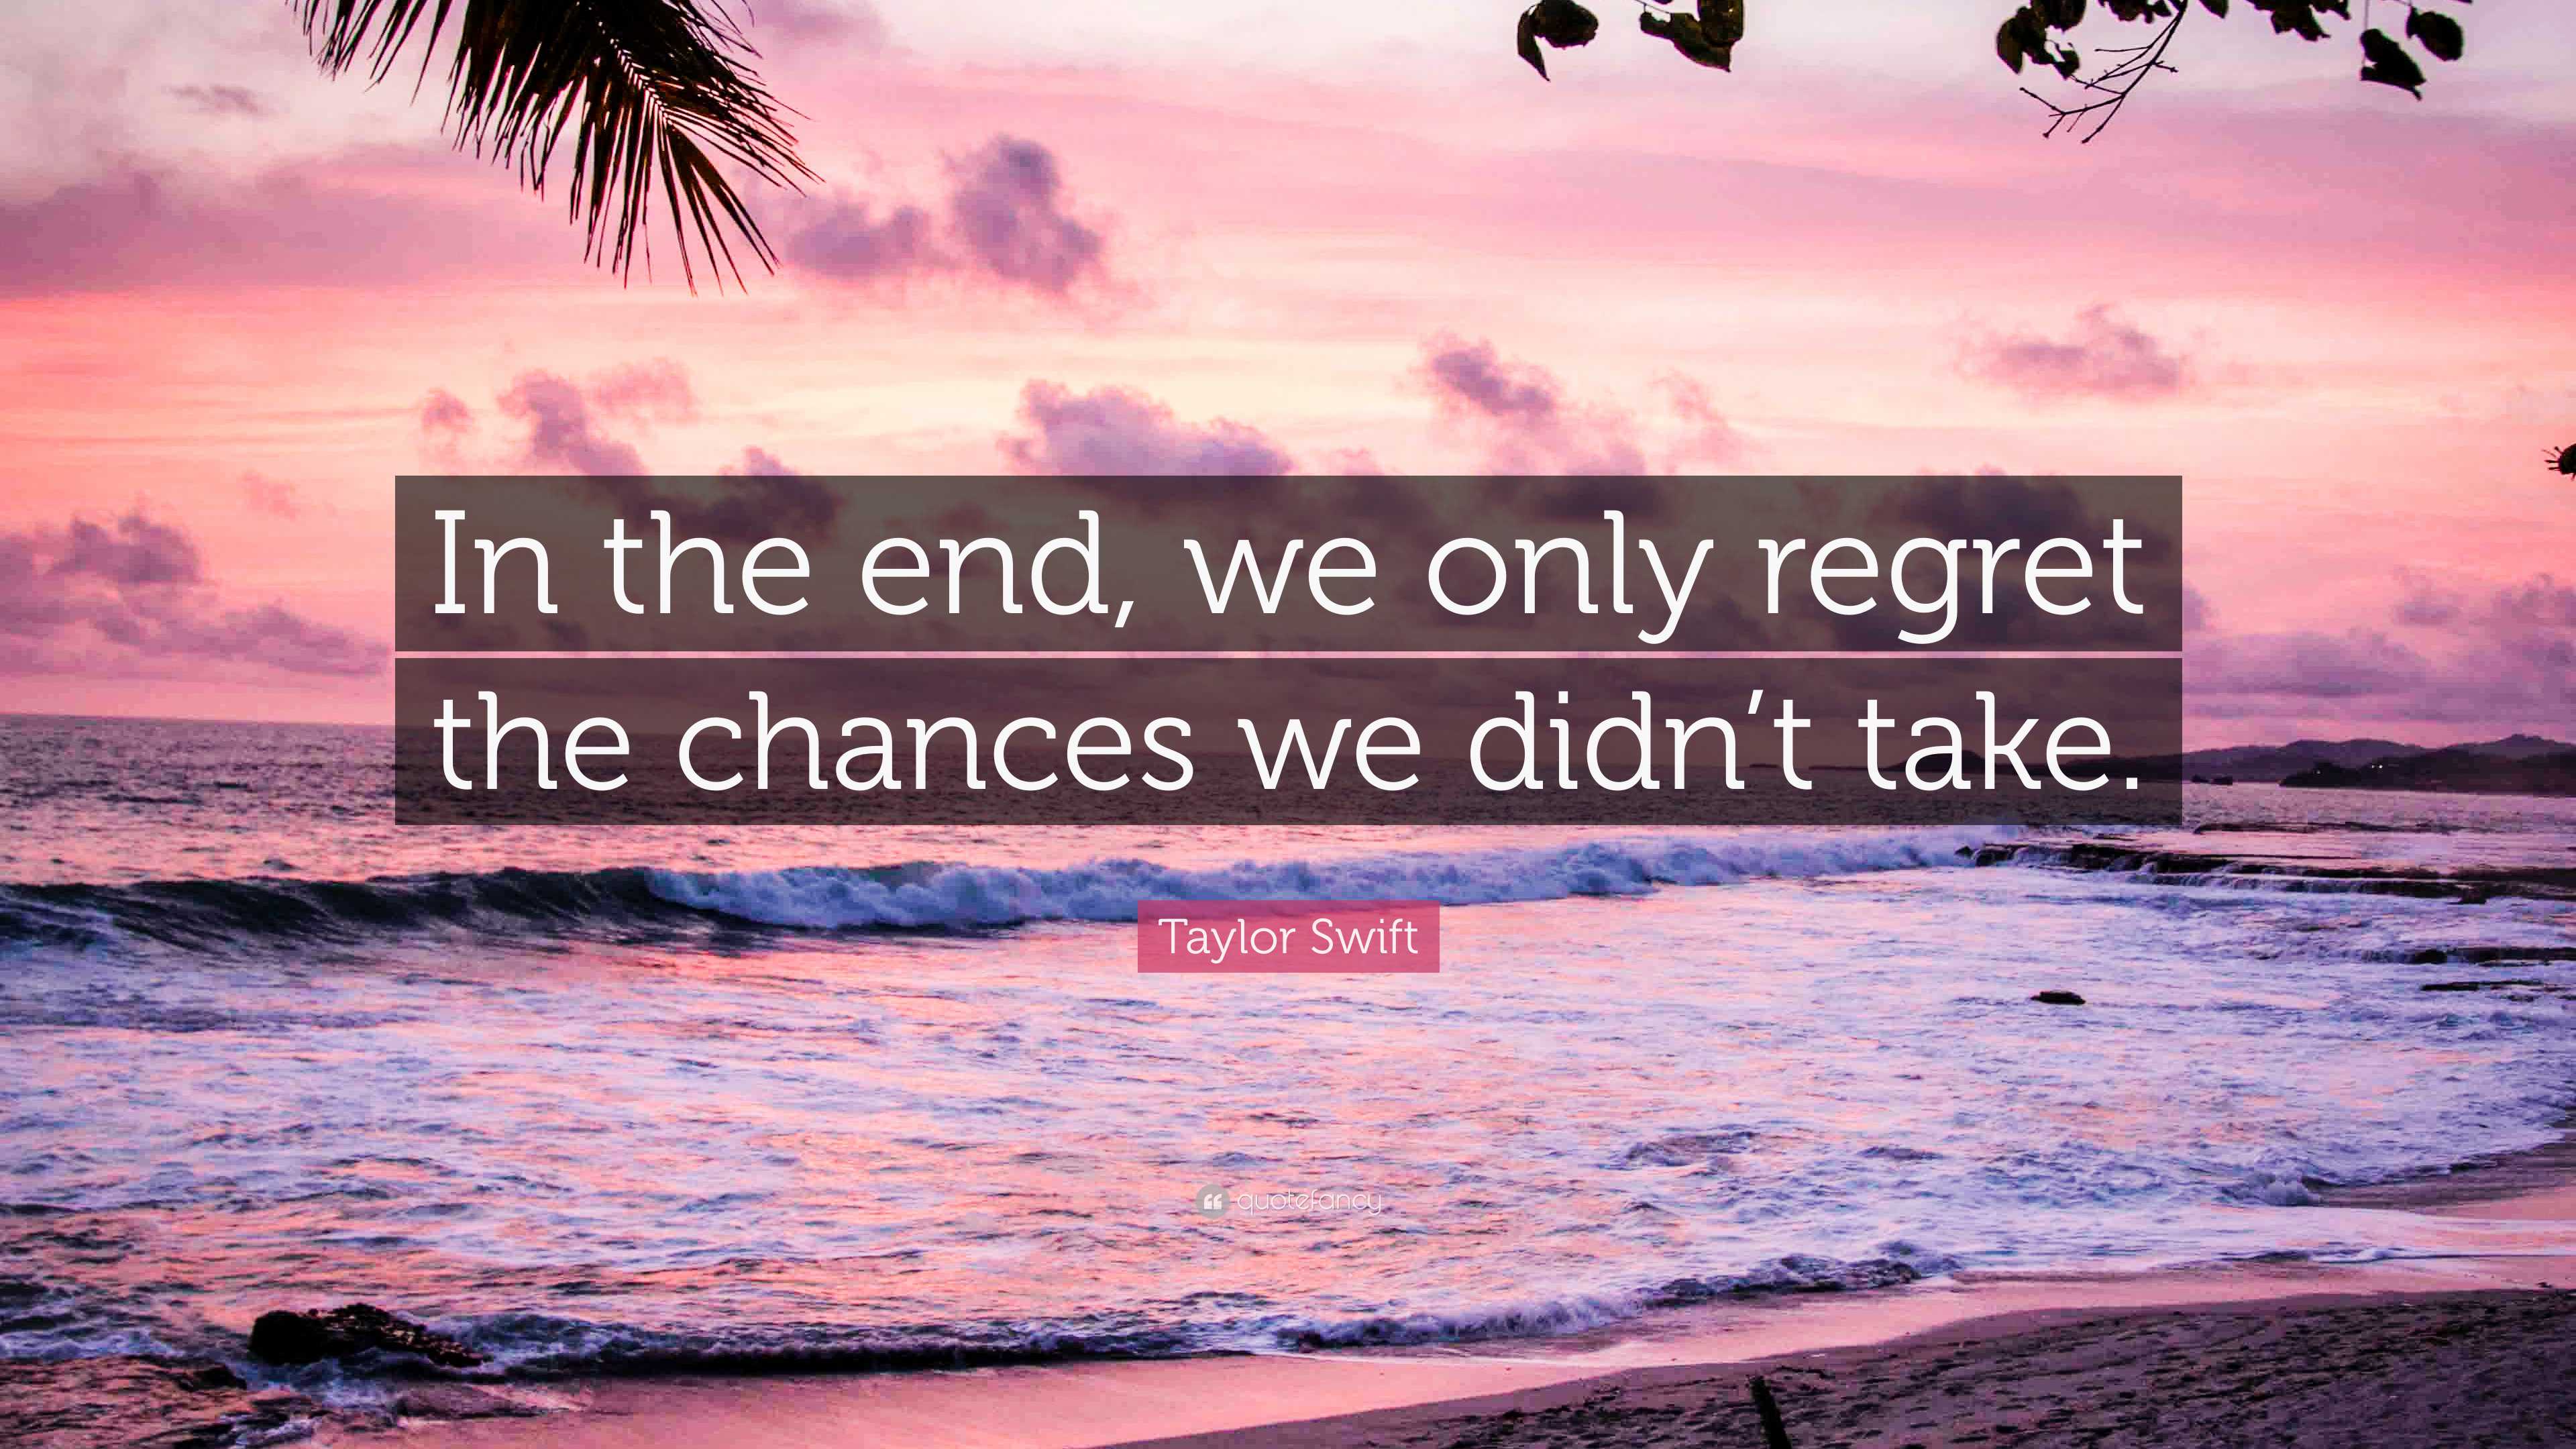 Taylor Swift Quote: “In the end, we only regret the chances we didn't take.”